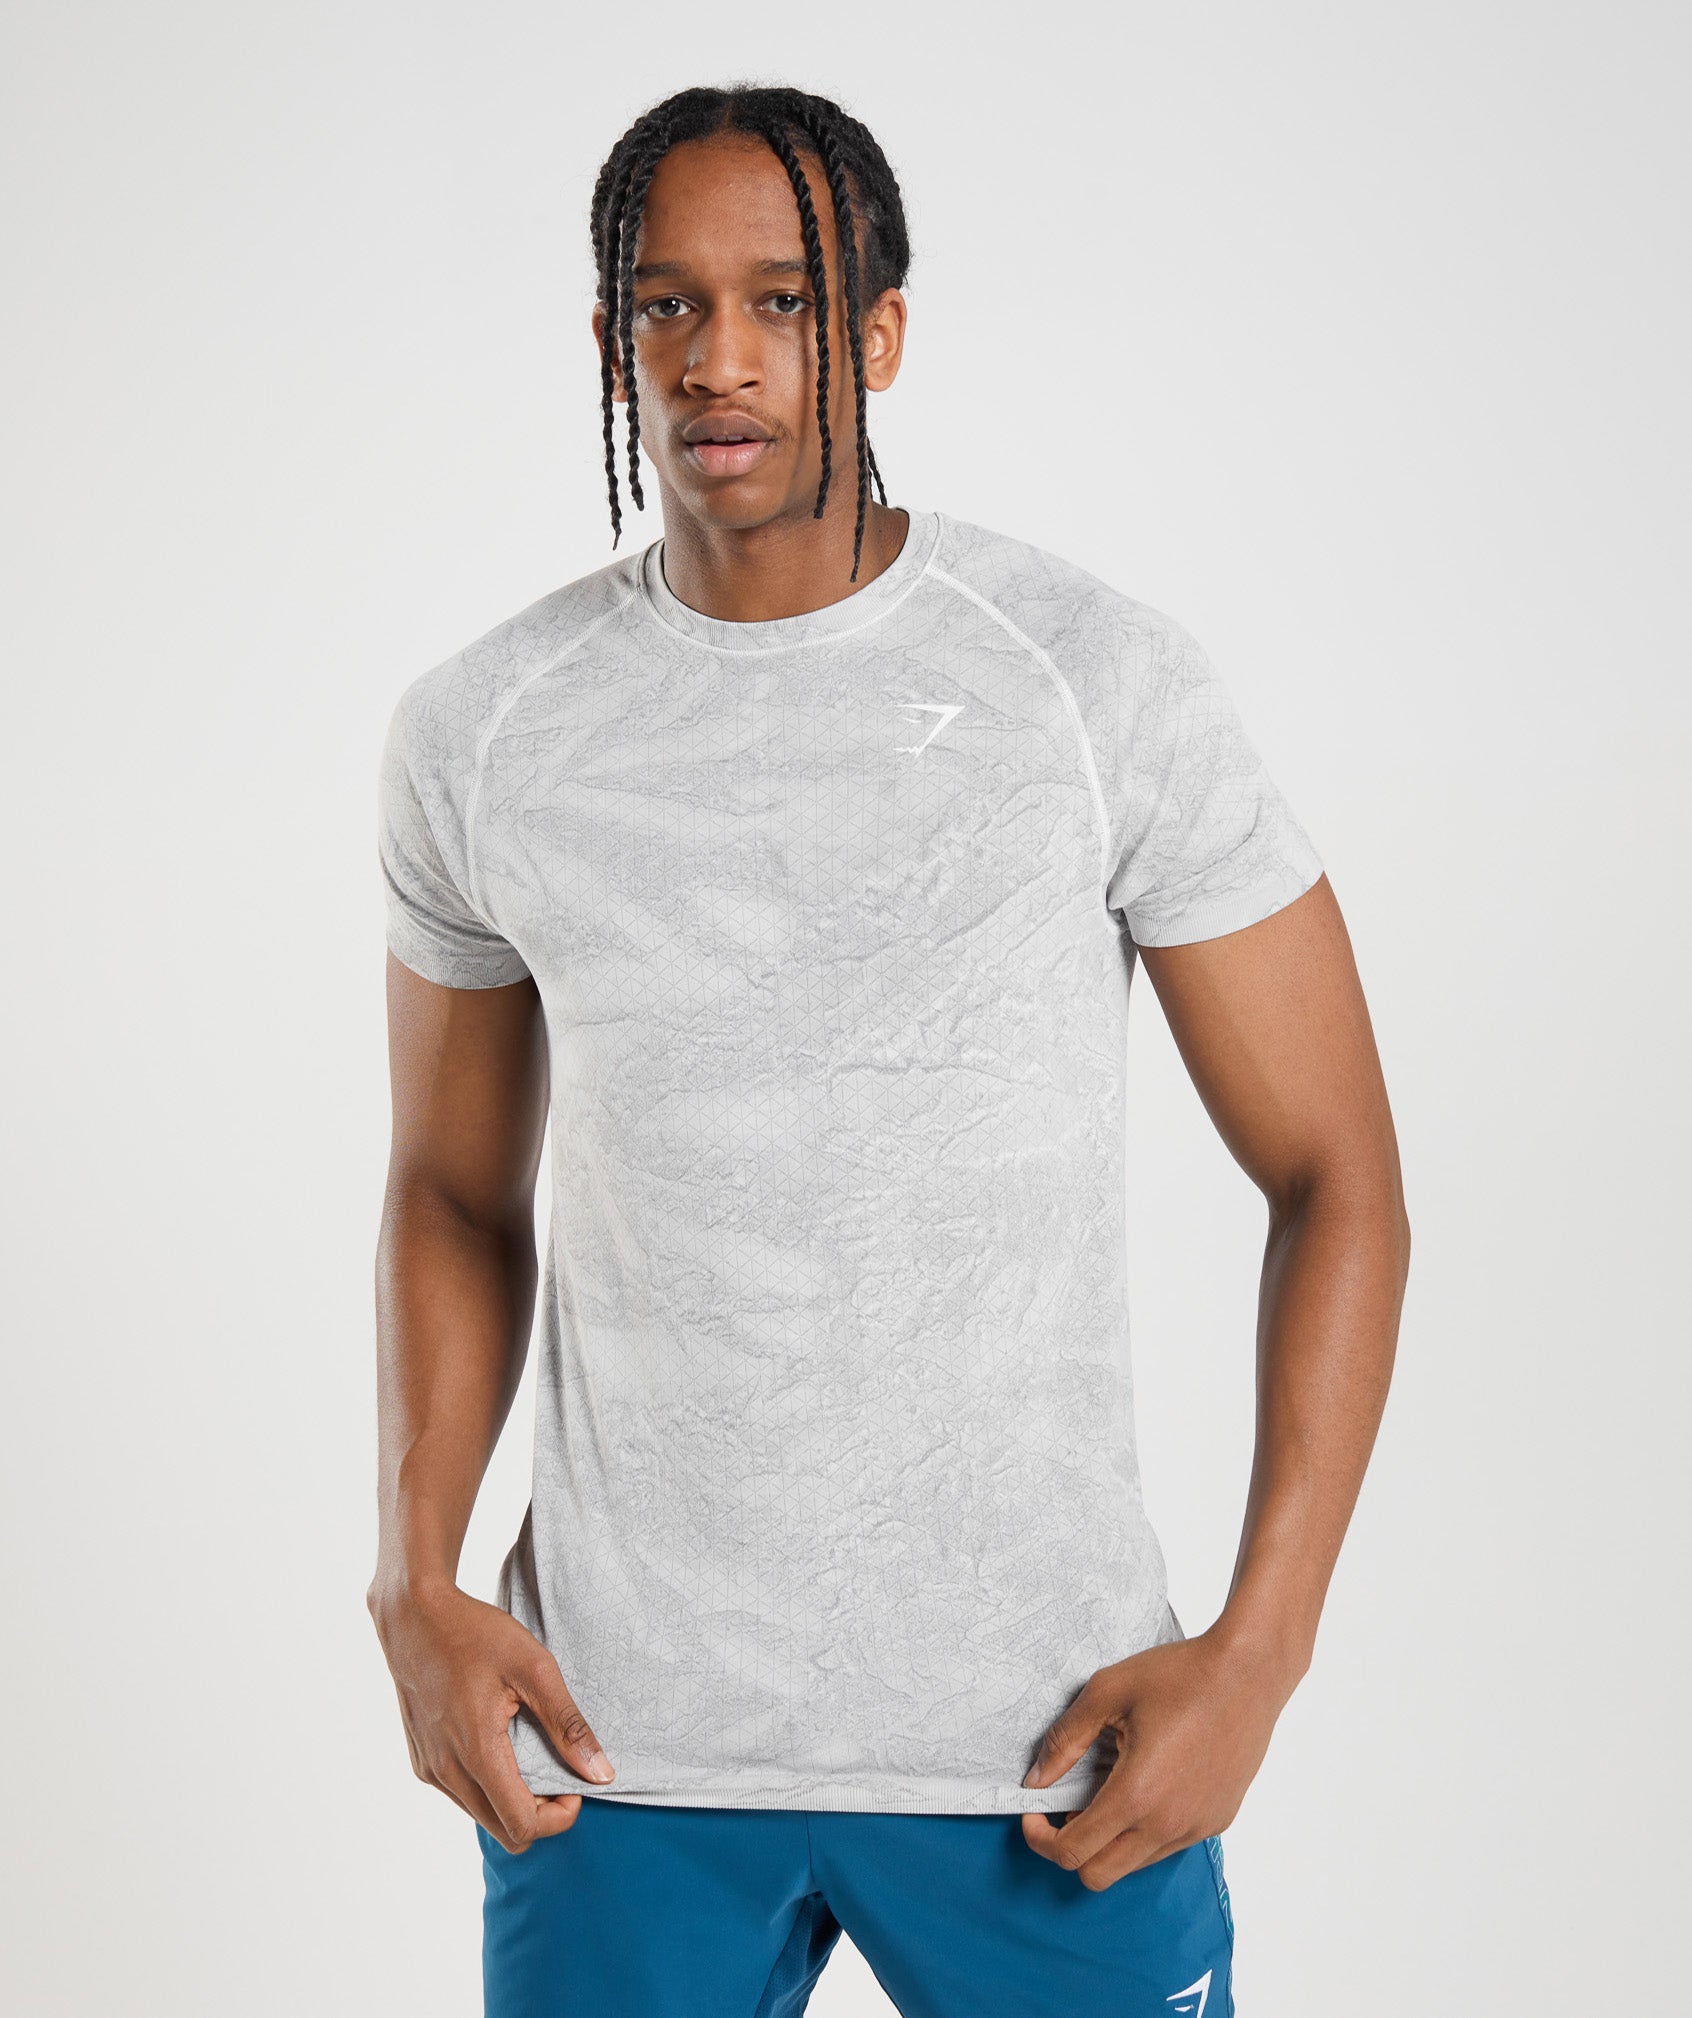 Geo Seamless T-Shirt in Off White/Light Grey - view 1